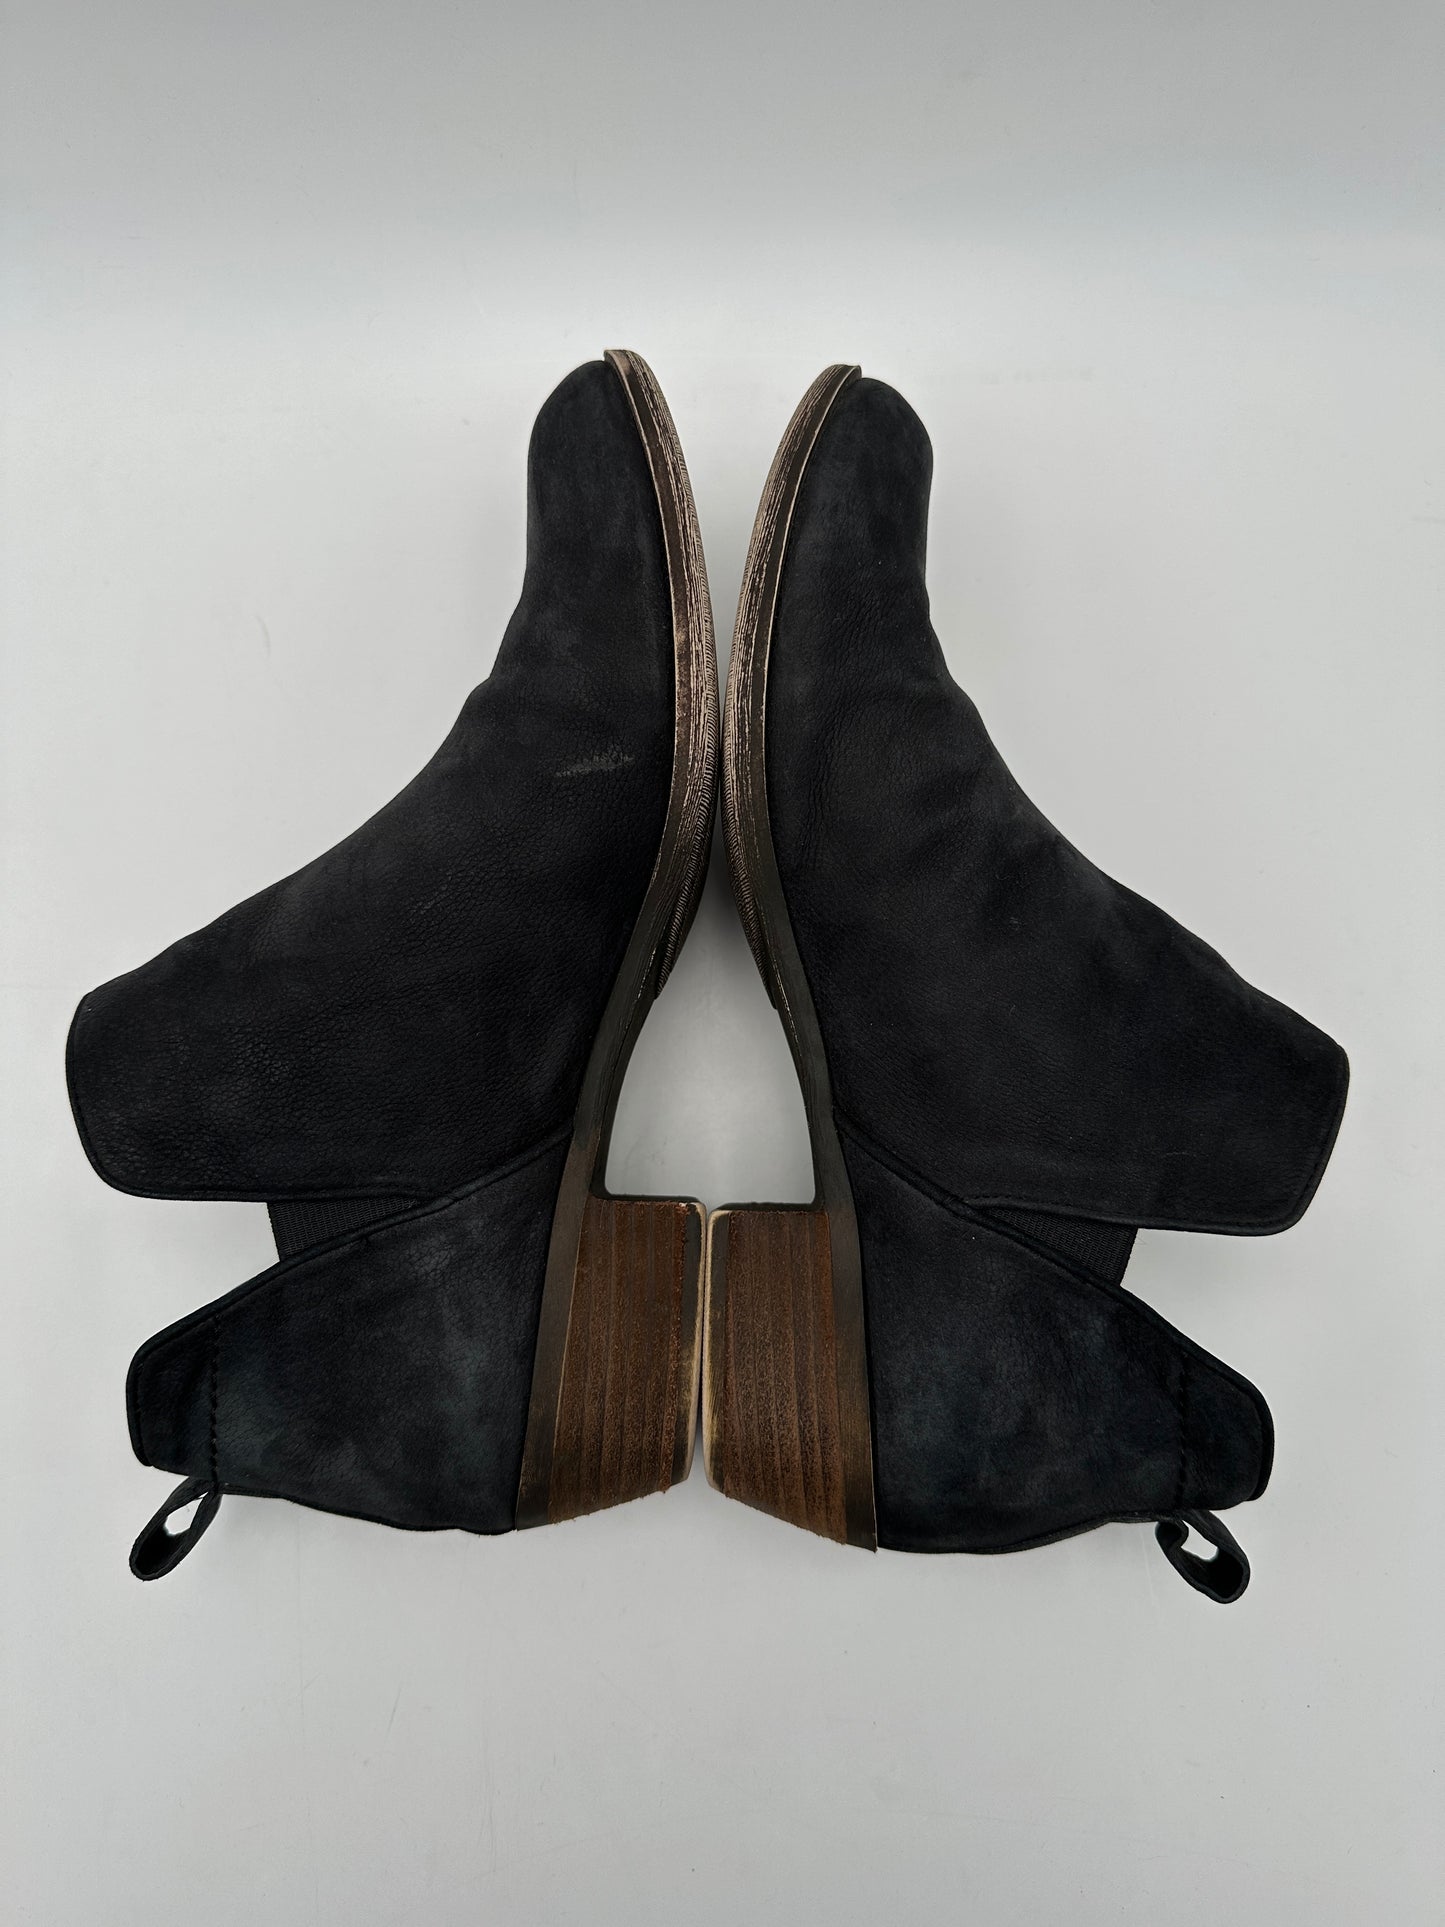 BP. Size 9M Black Suede Ankle Boots Booties, 2 3/8" heel